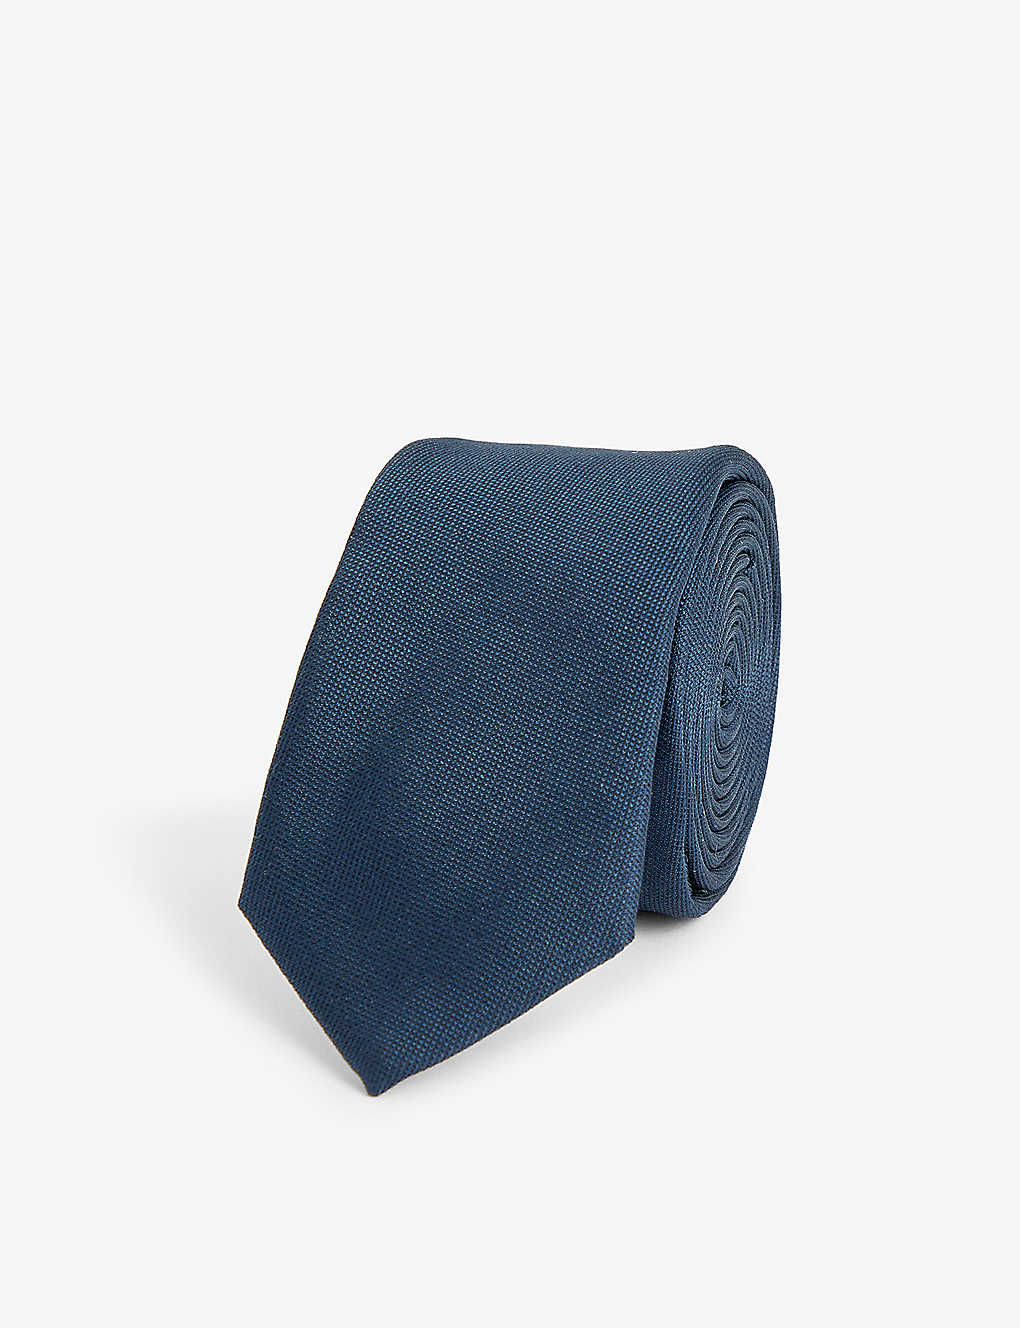 Givenchy Mens Navy Tonal Textured-weave Silk Tie